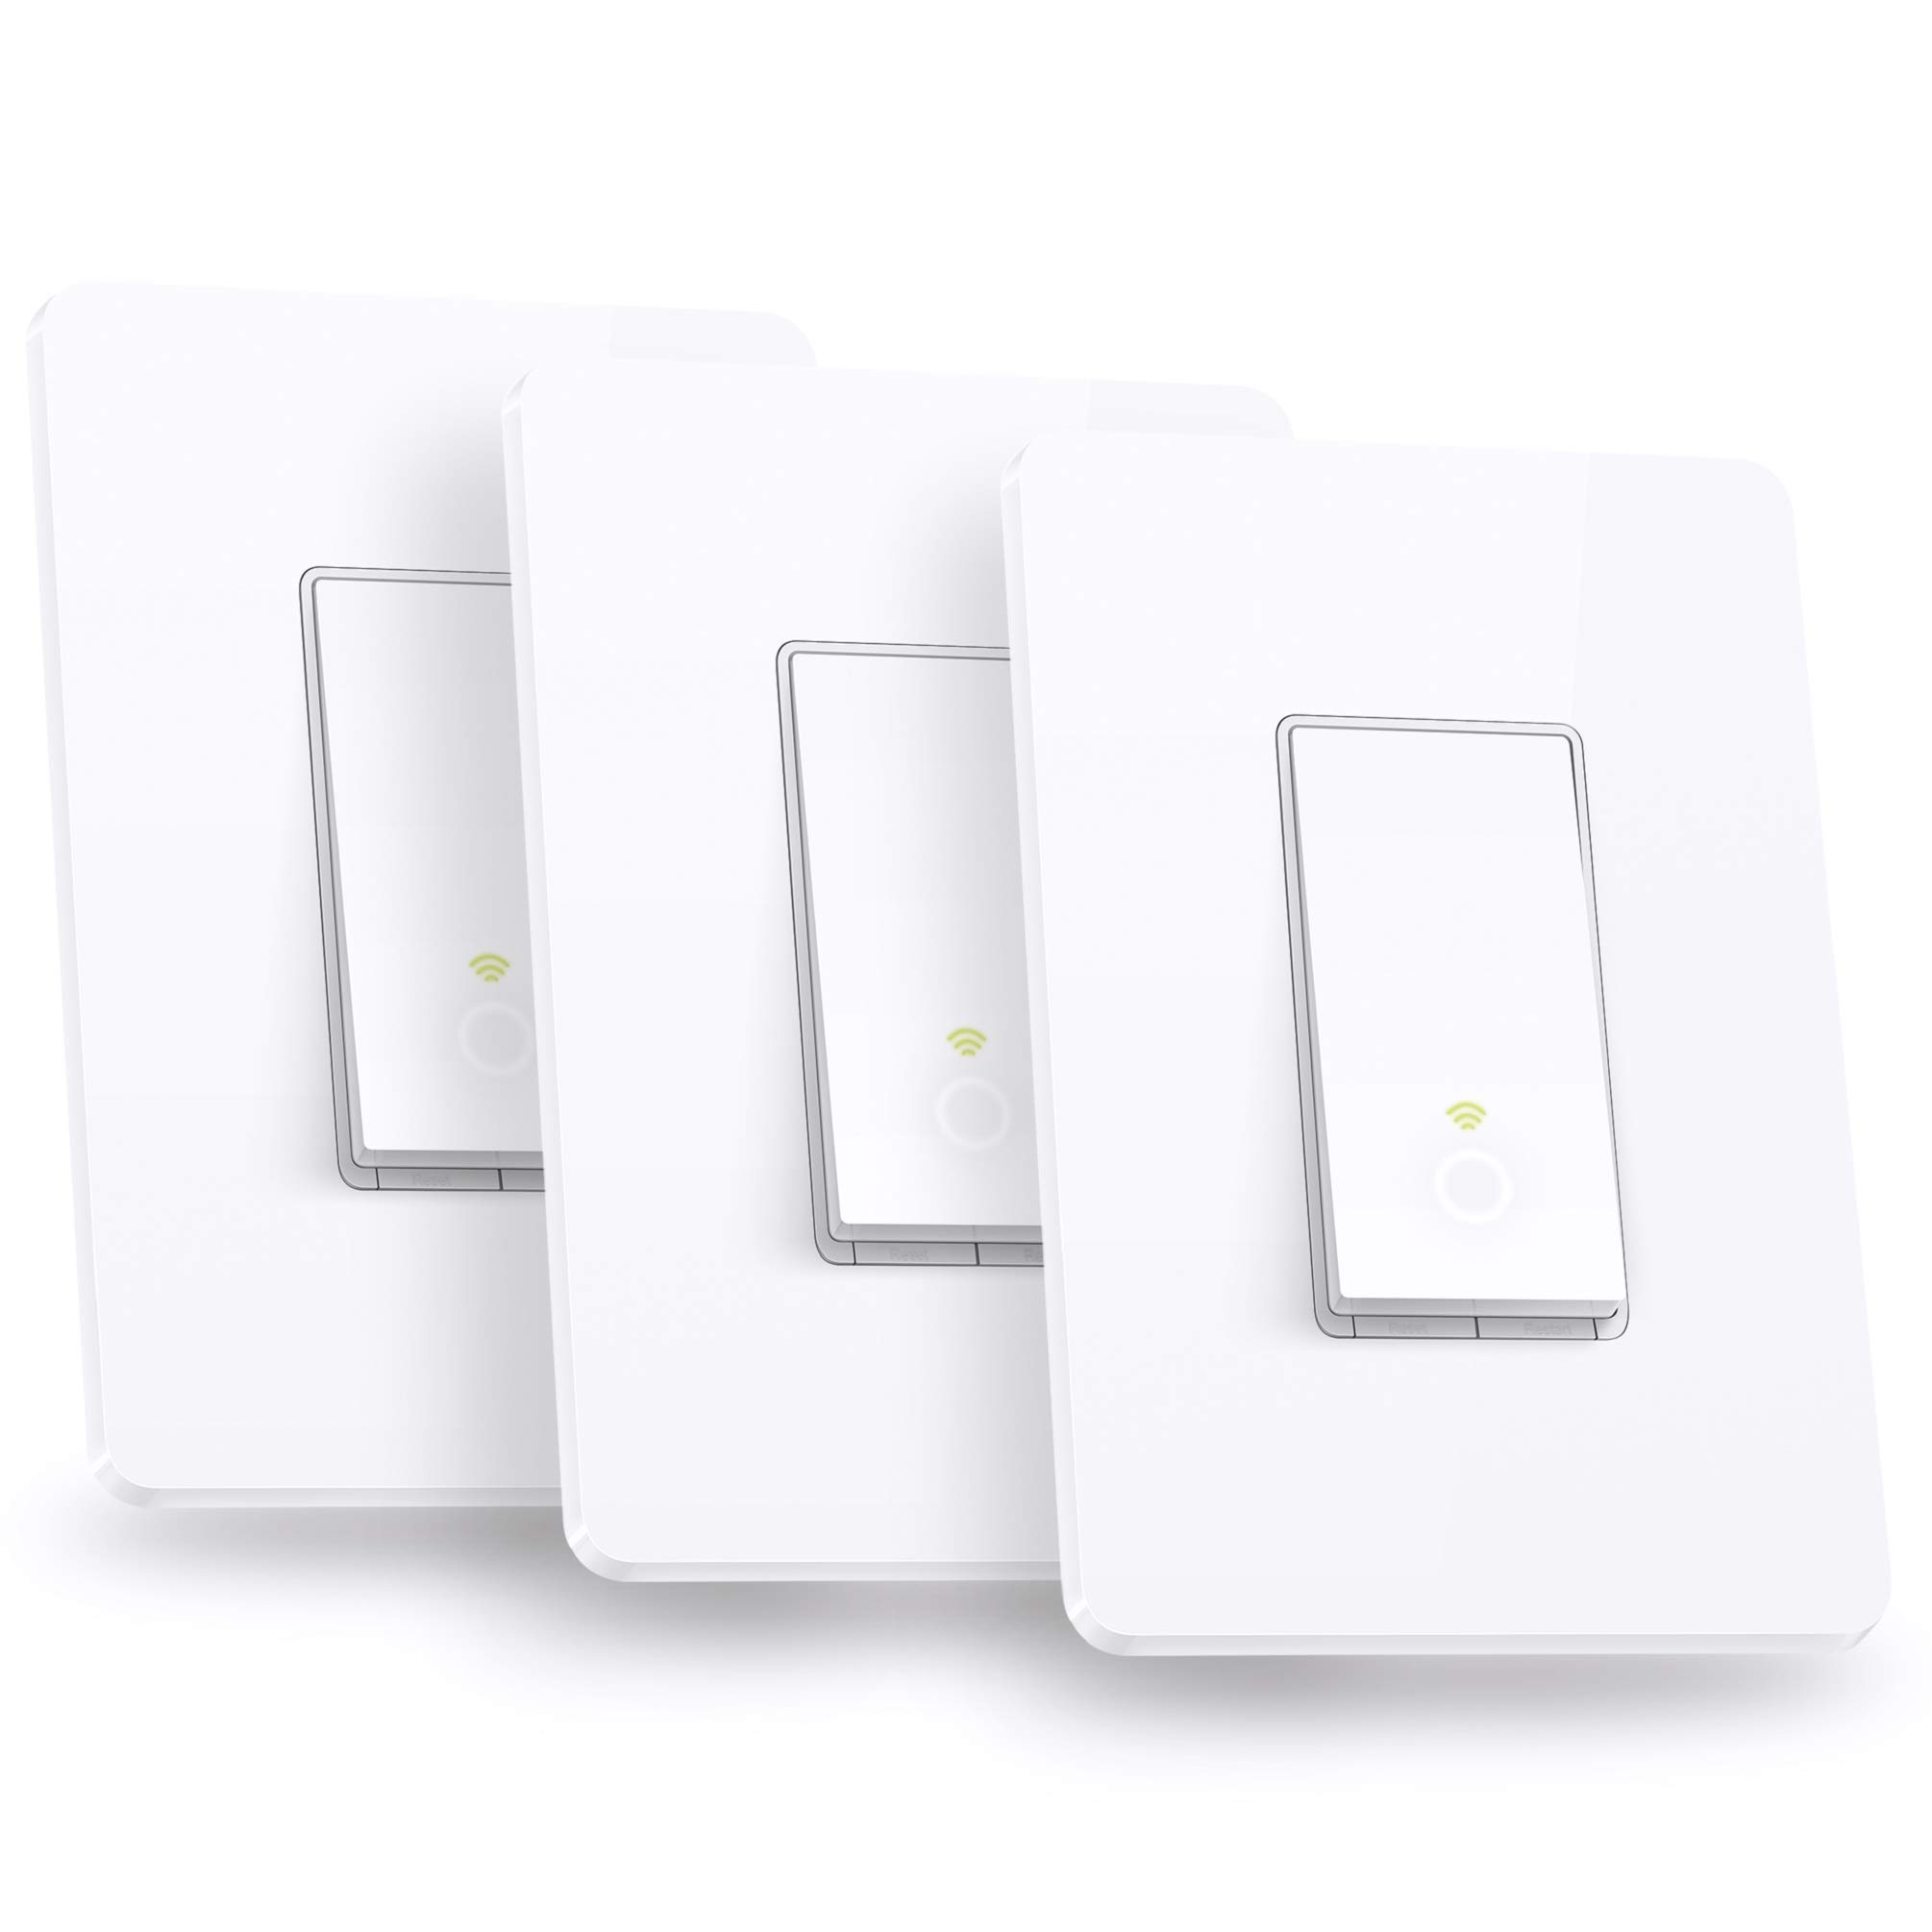 3-Pack TP Link Kasa Smart Wi-Fi Light Switch (HS200P3) $32+ Free Shipping